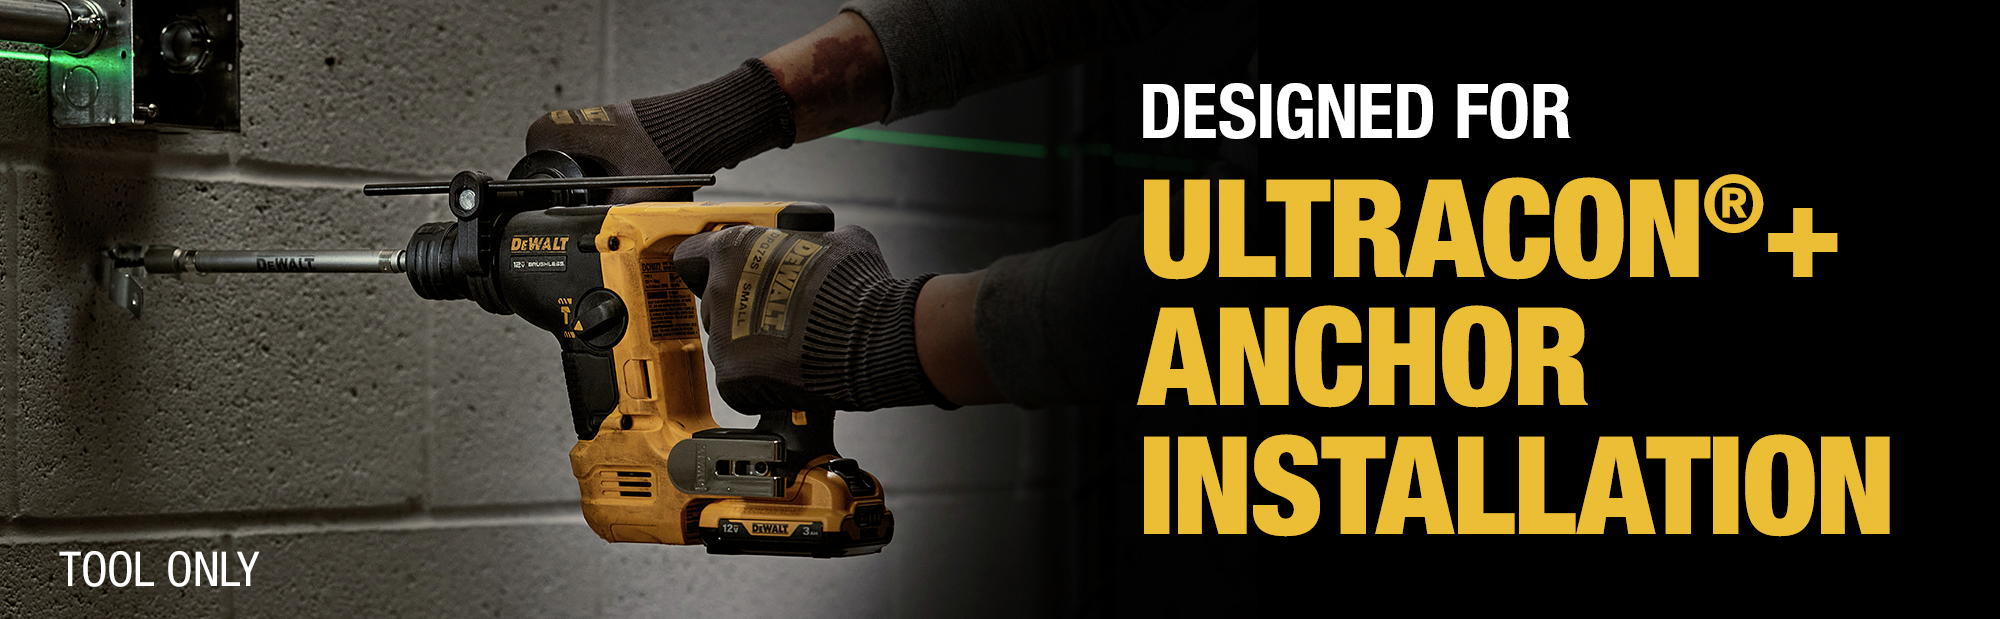 Designed for Ultracon+ Anchor Installation